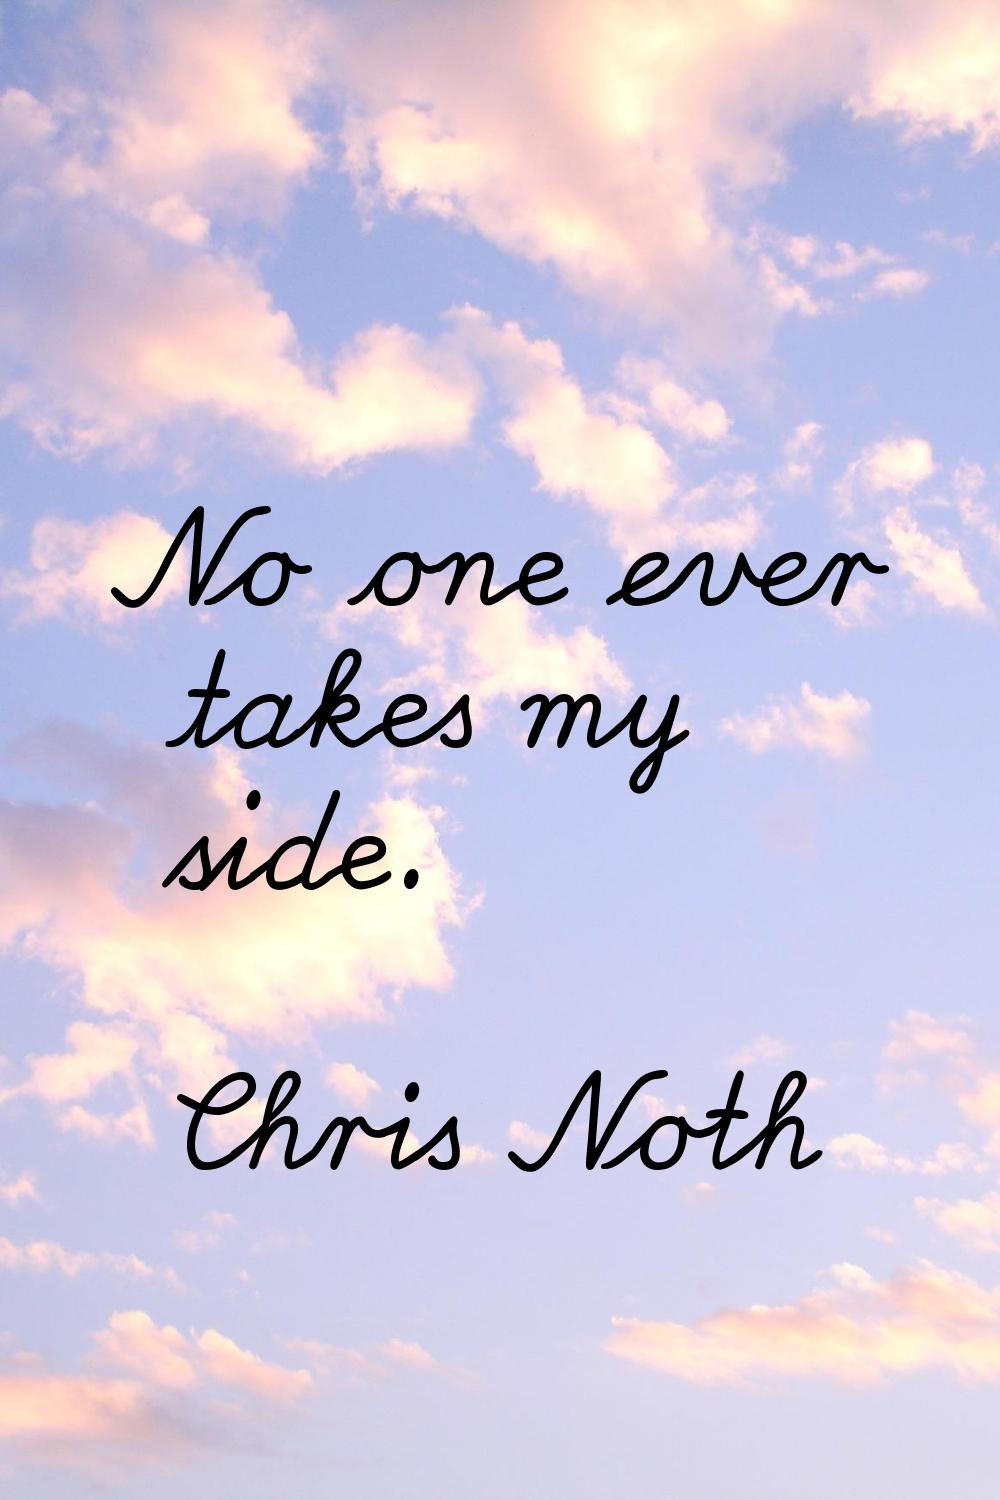 No one ever takes my side.